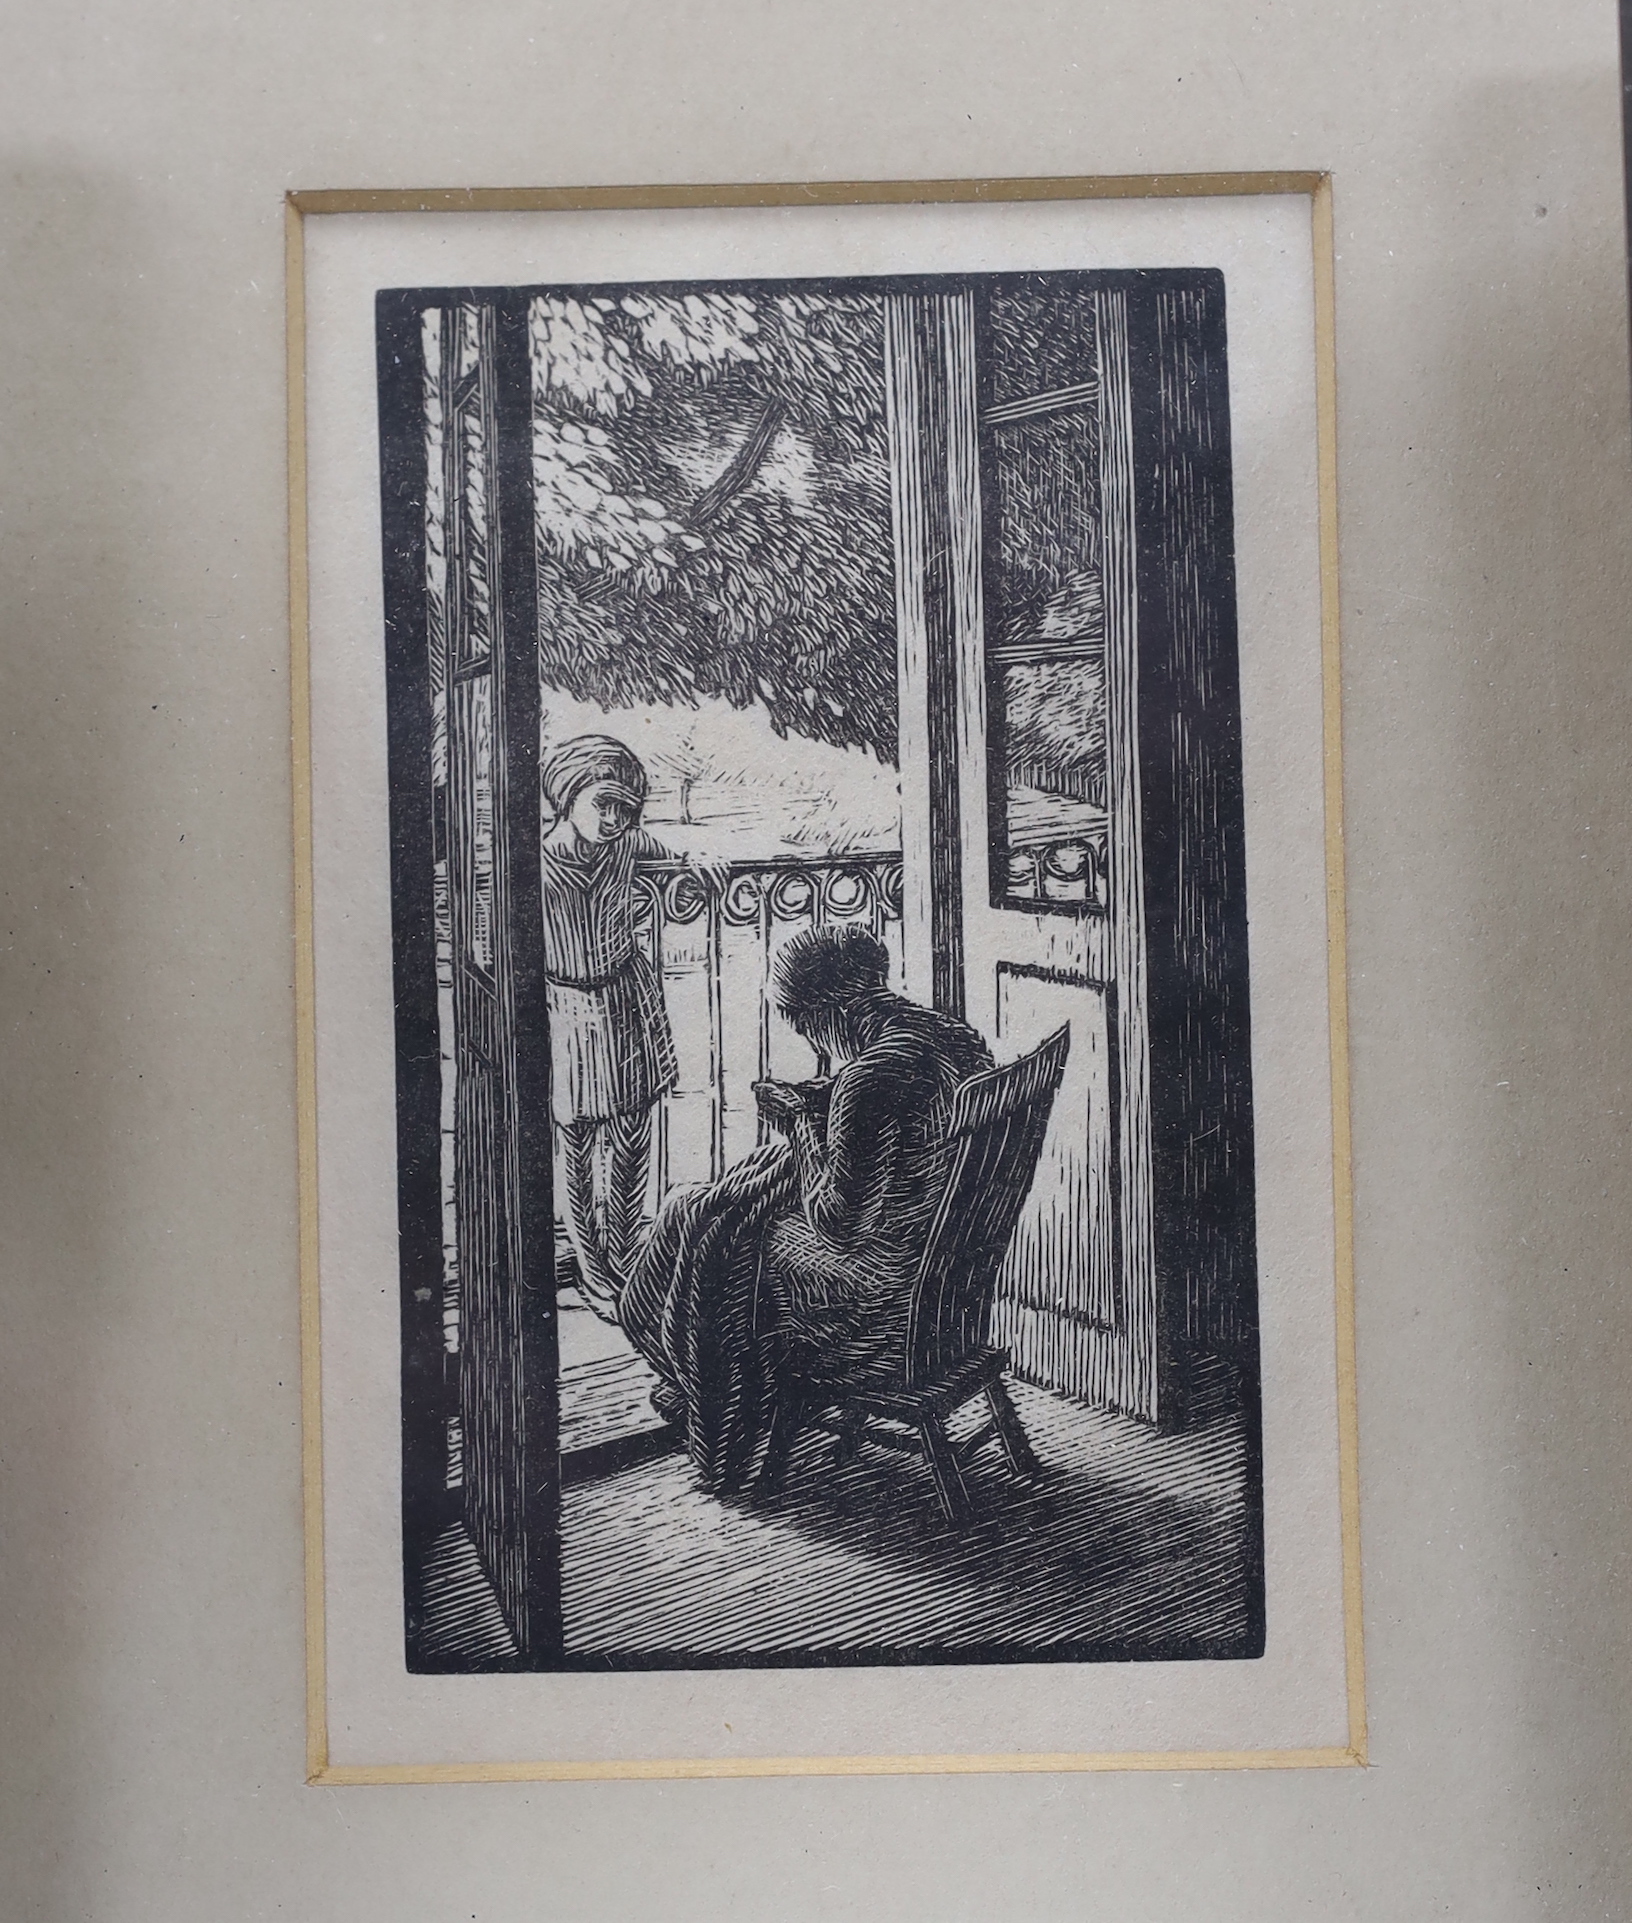 Gwen Raverat (1885-1957), three etchings or woodcuts (probably from Thomas Agnews), comprising 'December', 'June' and 'The Balcony', one signed and inscribed in pencil, largest 11 x 7cm